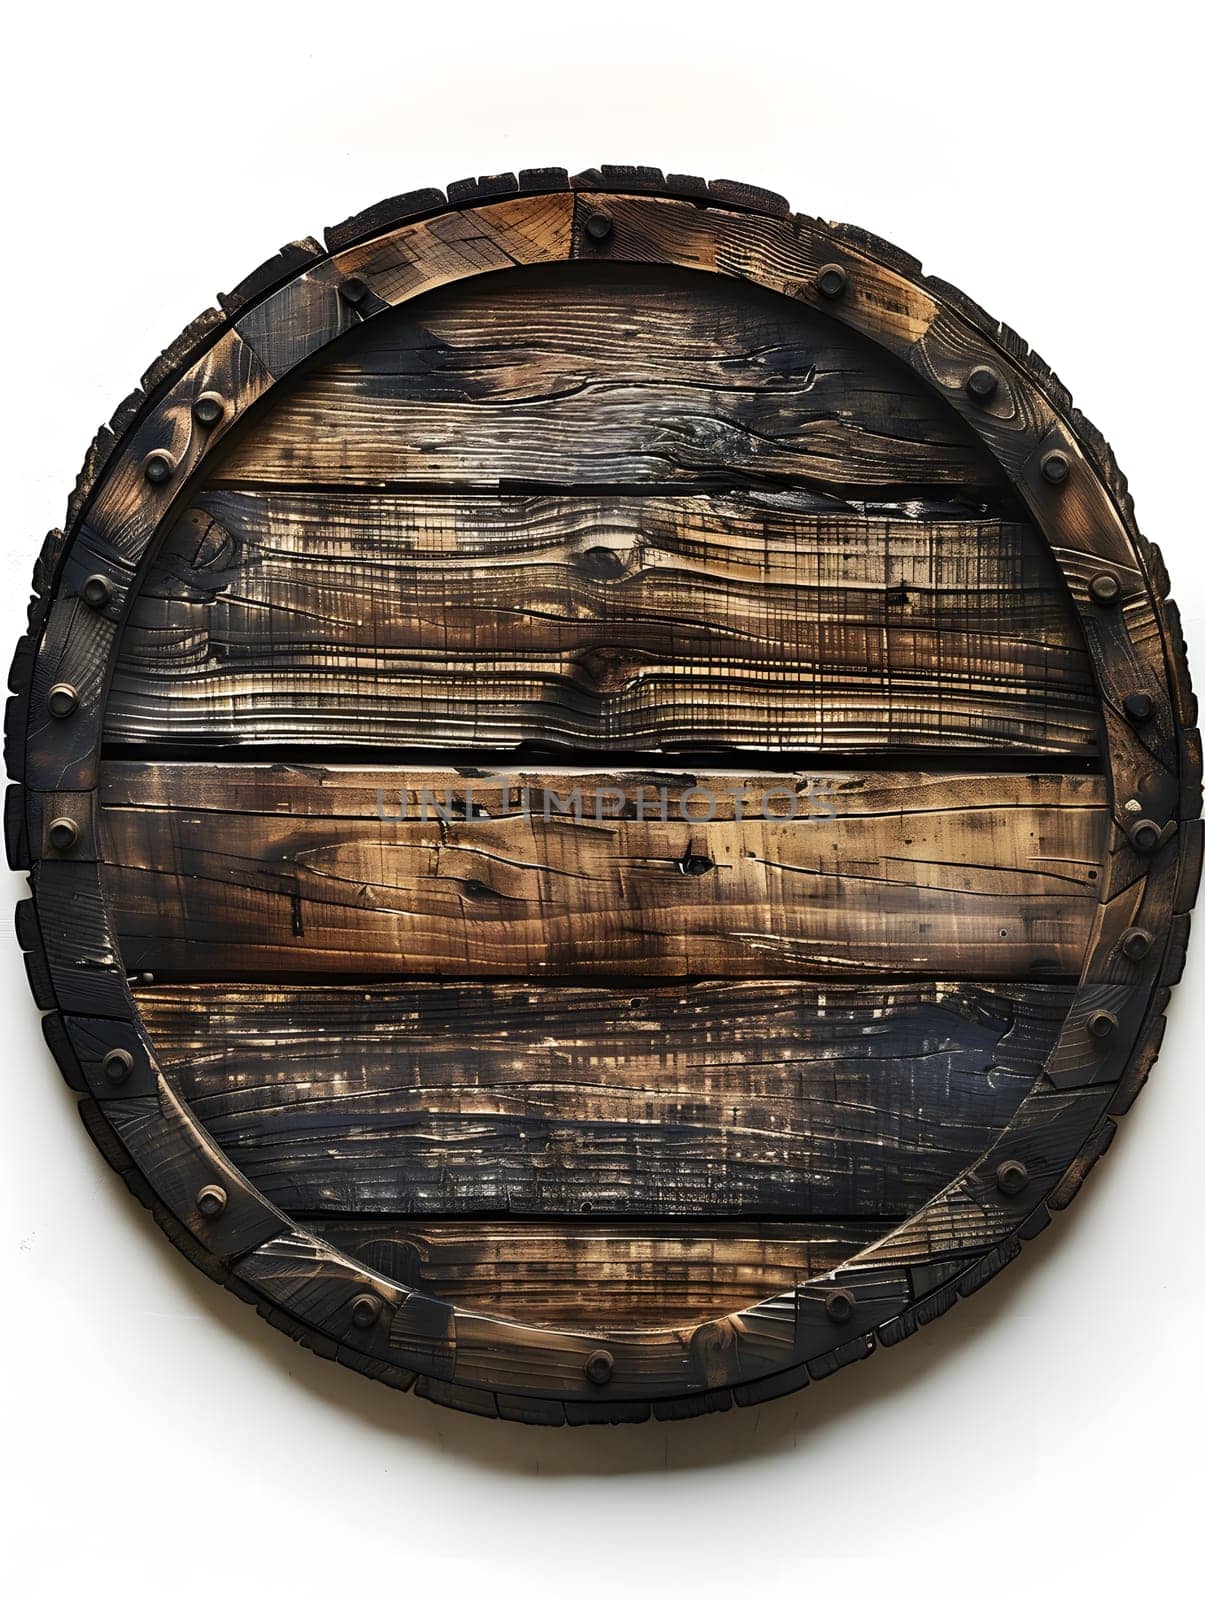 A fashion accessory made of brown wood, a natural material shaped in a circle with a metal rim, displayed against a white background. An artful representation of traditional craftsmanship